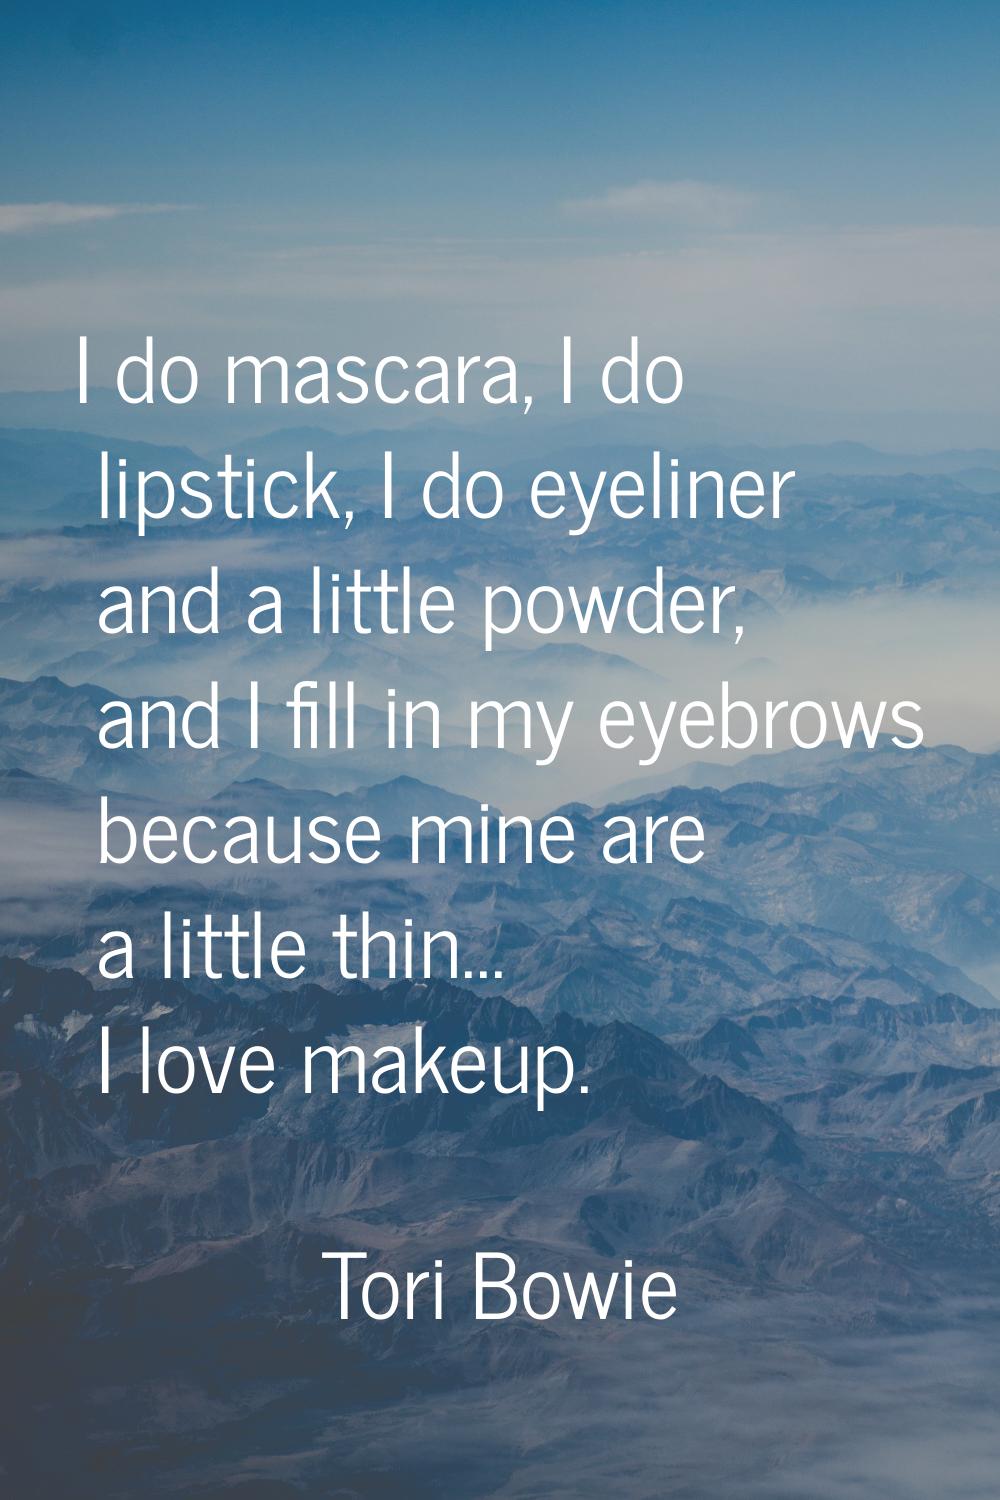 I do mascara, I do lipstick, I do eyeliner and a little powder, and I fill in my eyebrows because m